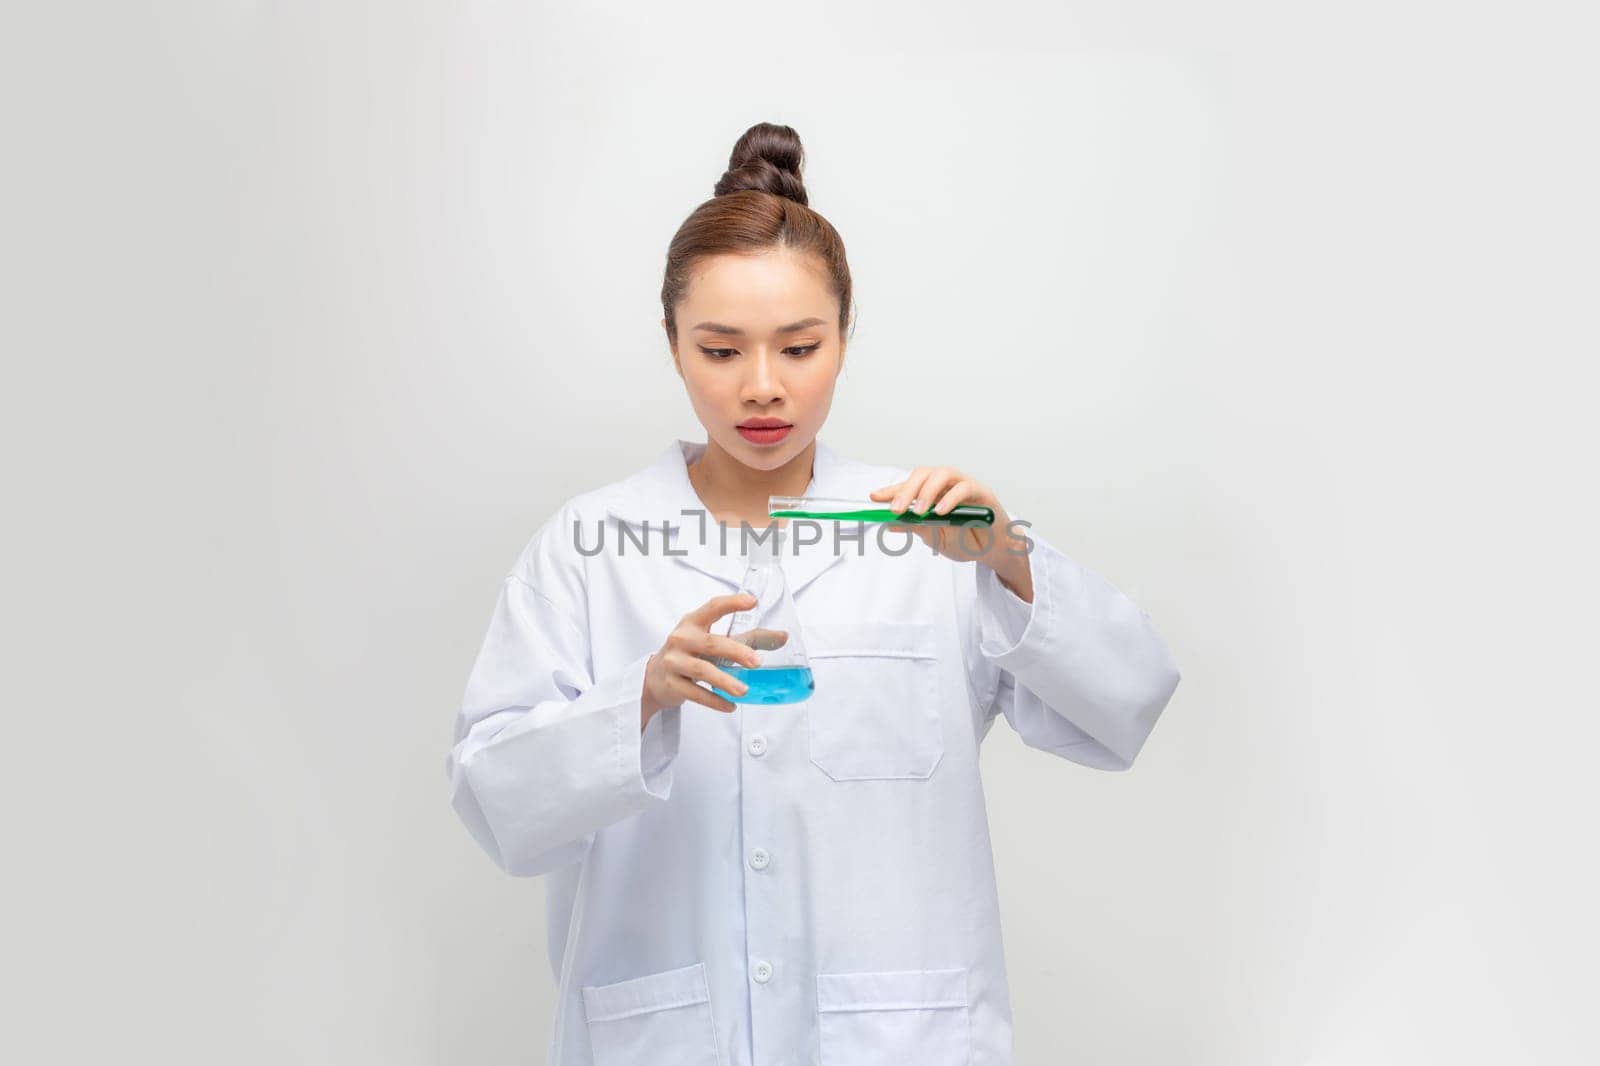 An Asia scientific researcher holding at a liquid solution in a lab.